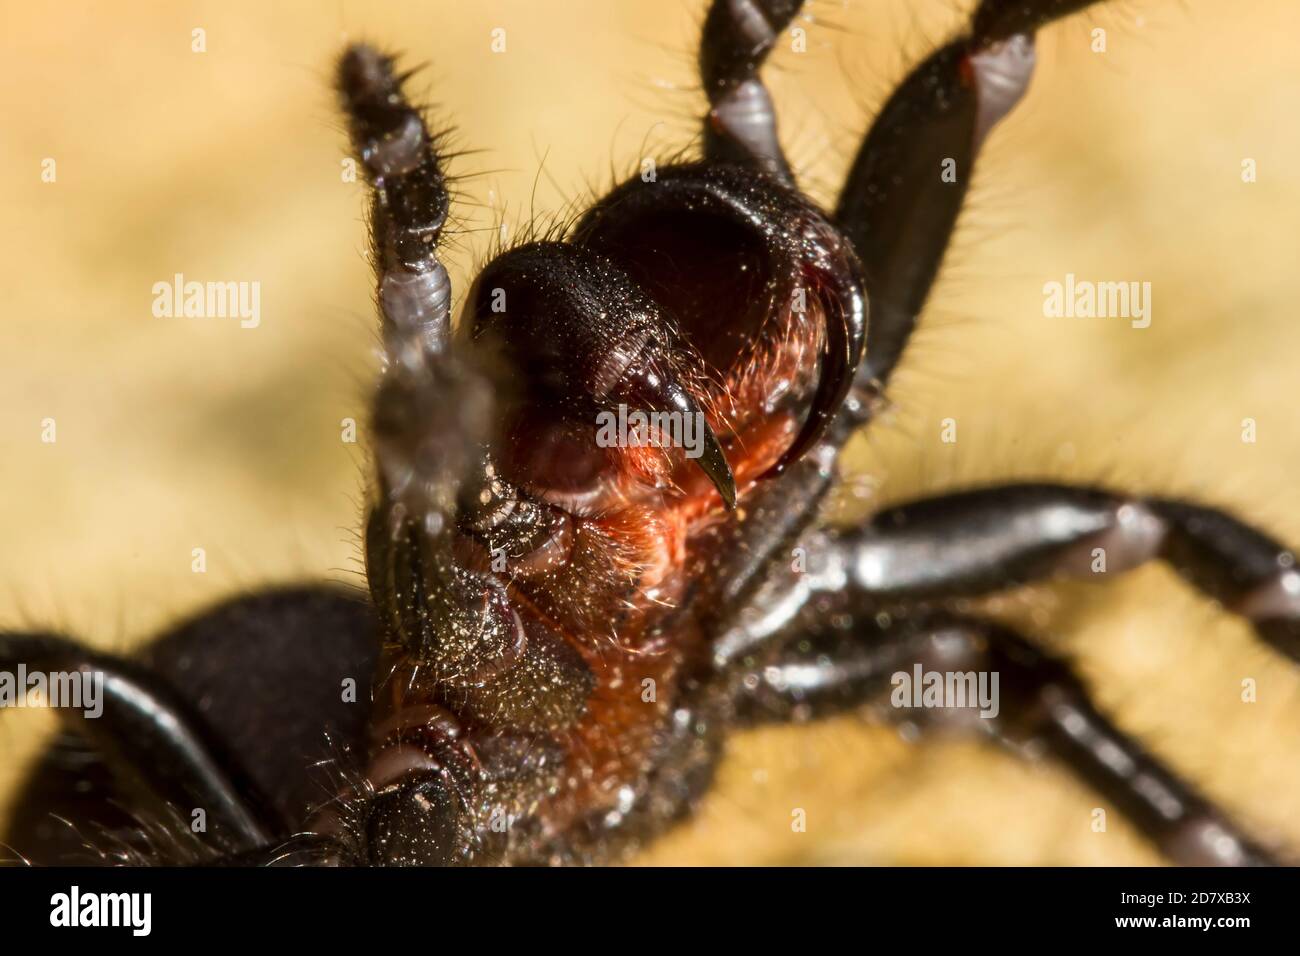 Sydney Funnel-web Spider in defensive stance Stock Photo